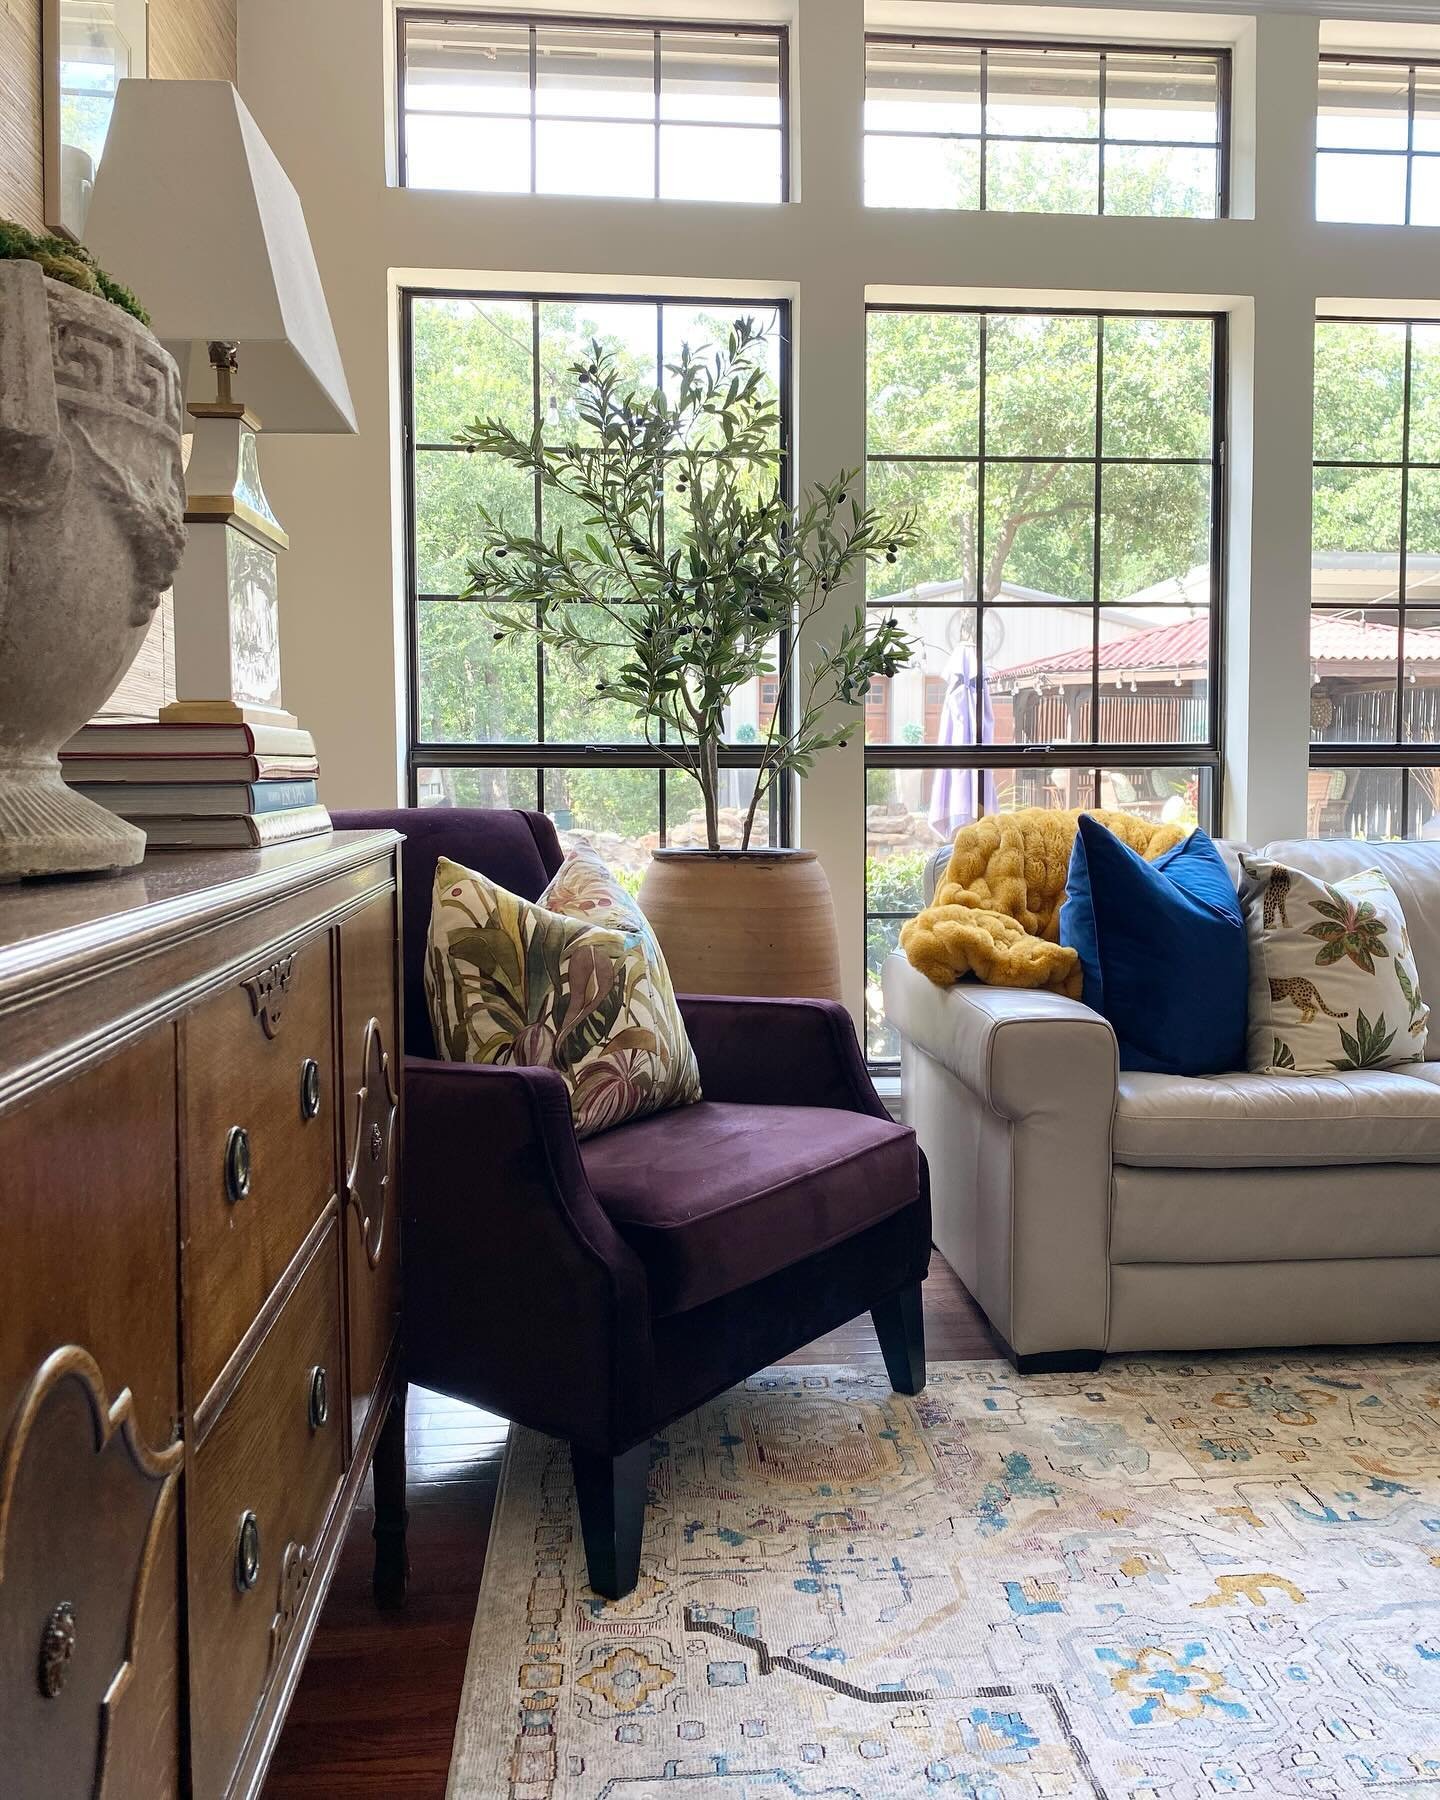 Who doesn&rsquo;t love natural light and colorful pillows paired with a vintage rug! #interiordesign #ruthiestaalseninteriors #leopardpillow #homedecor #livingspaces #olivetree #terracottapot #eggplantchairs #velvetchairs #dallasdesigner #colorfulhom